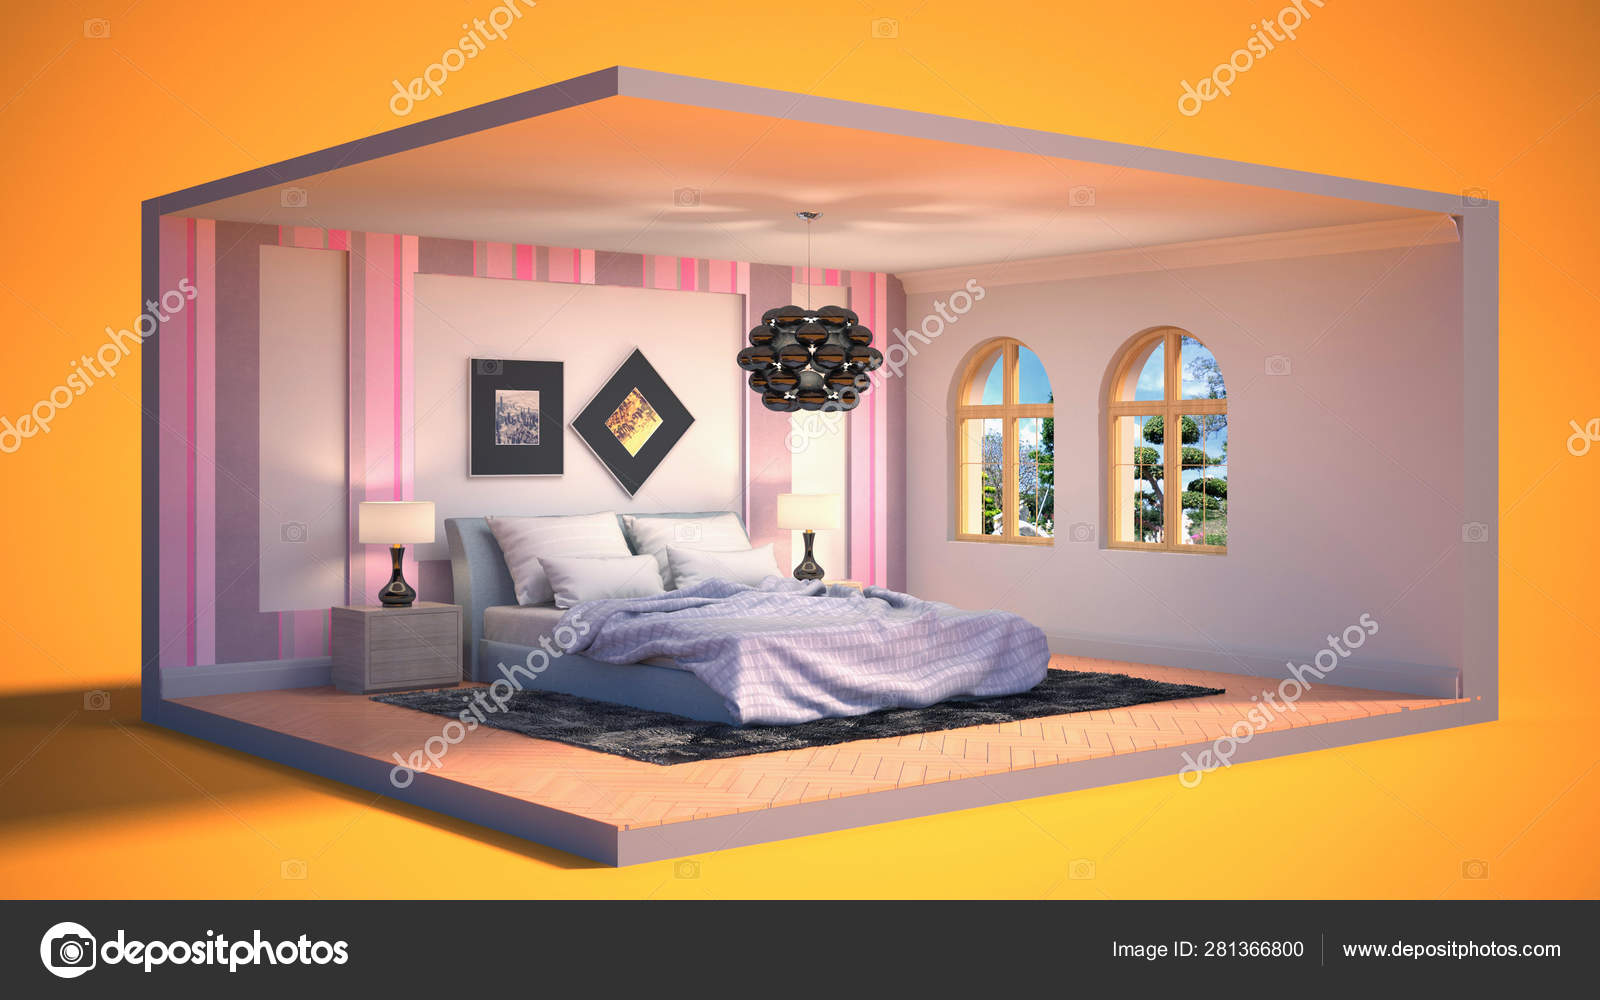 Interior Of The Bedroom In A Box 3d Illustration Stock Photo Image By C Stockernumber2 281366800